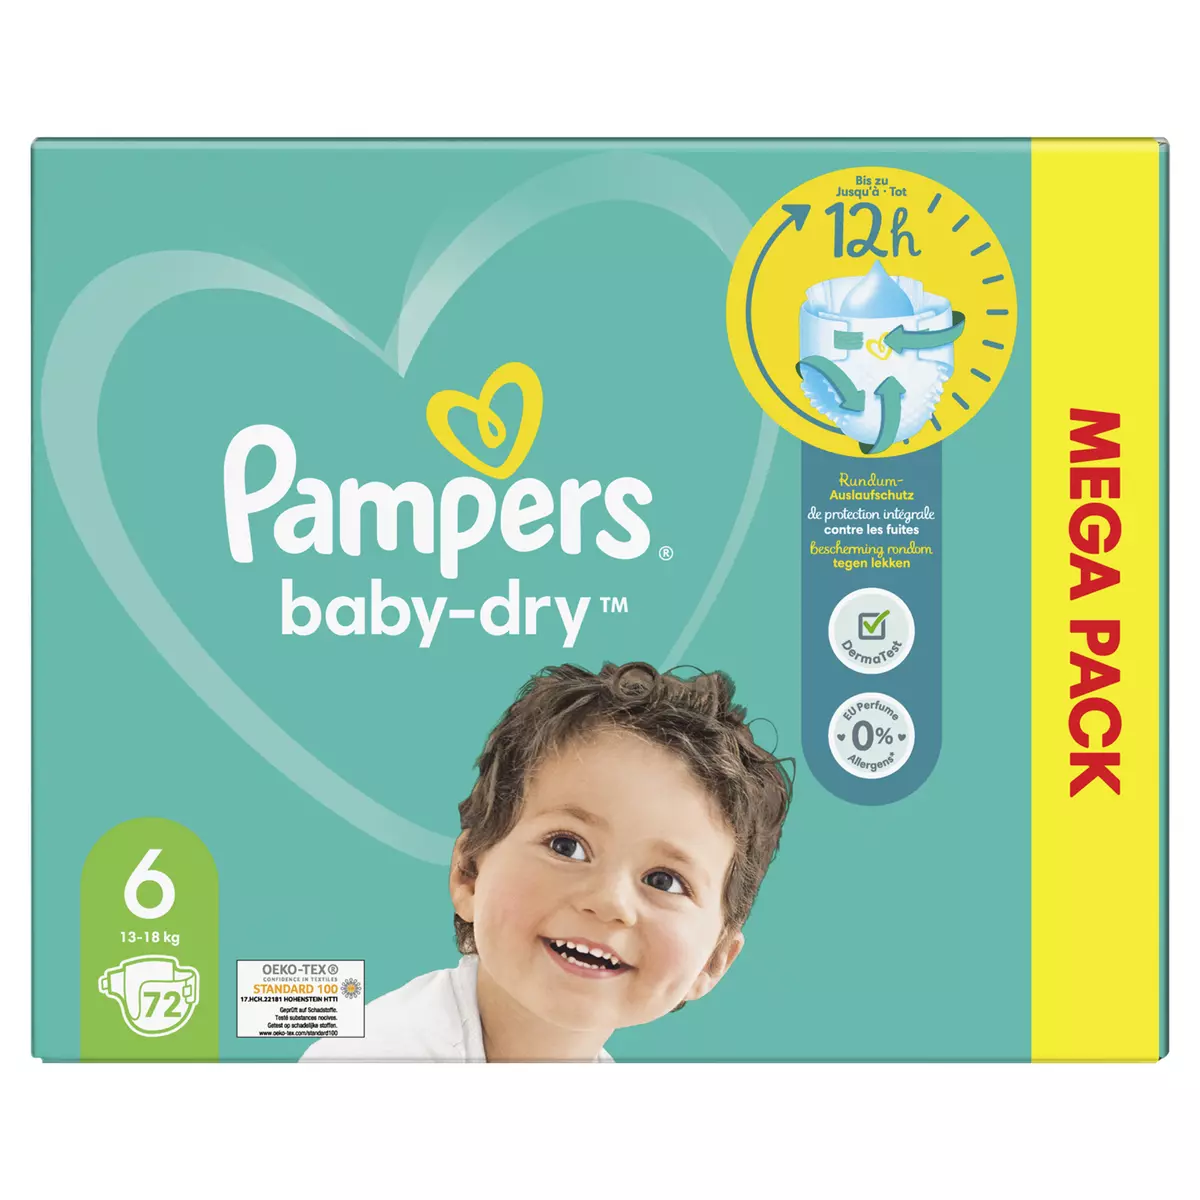 Pampers harmonie couches taille 6 +13kg par 22